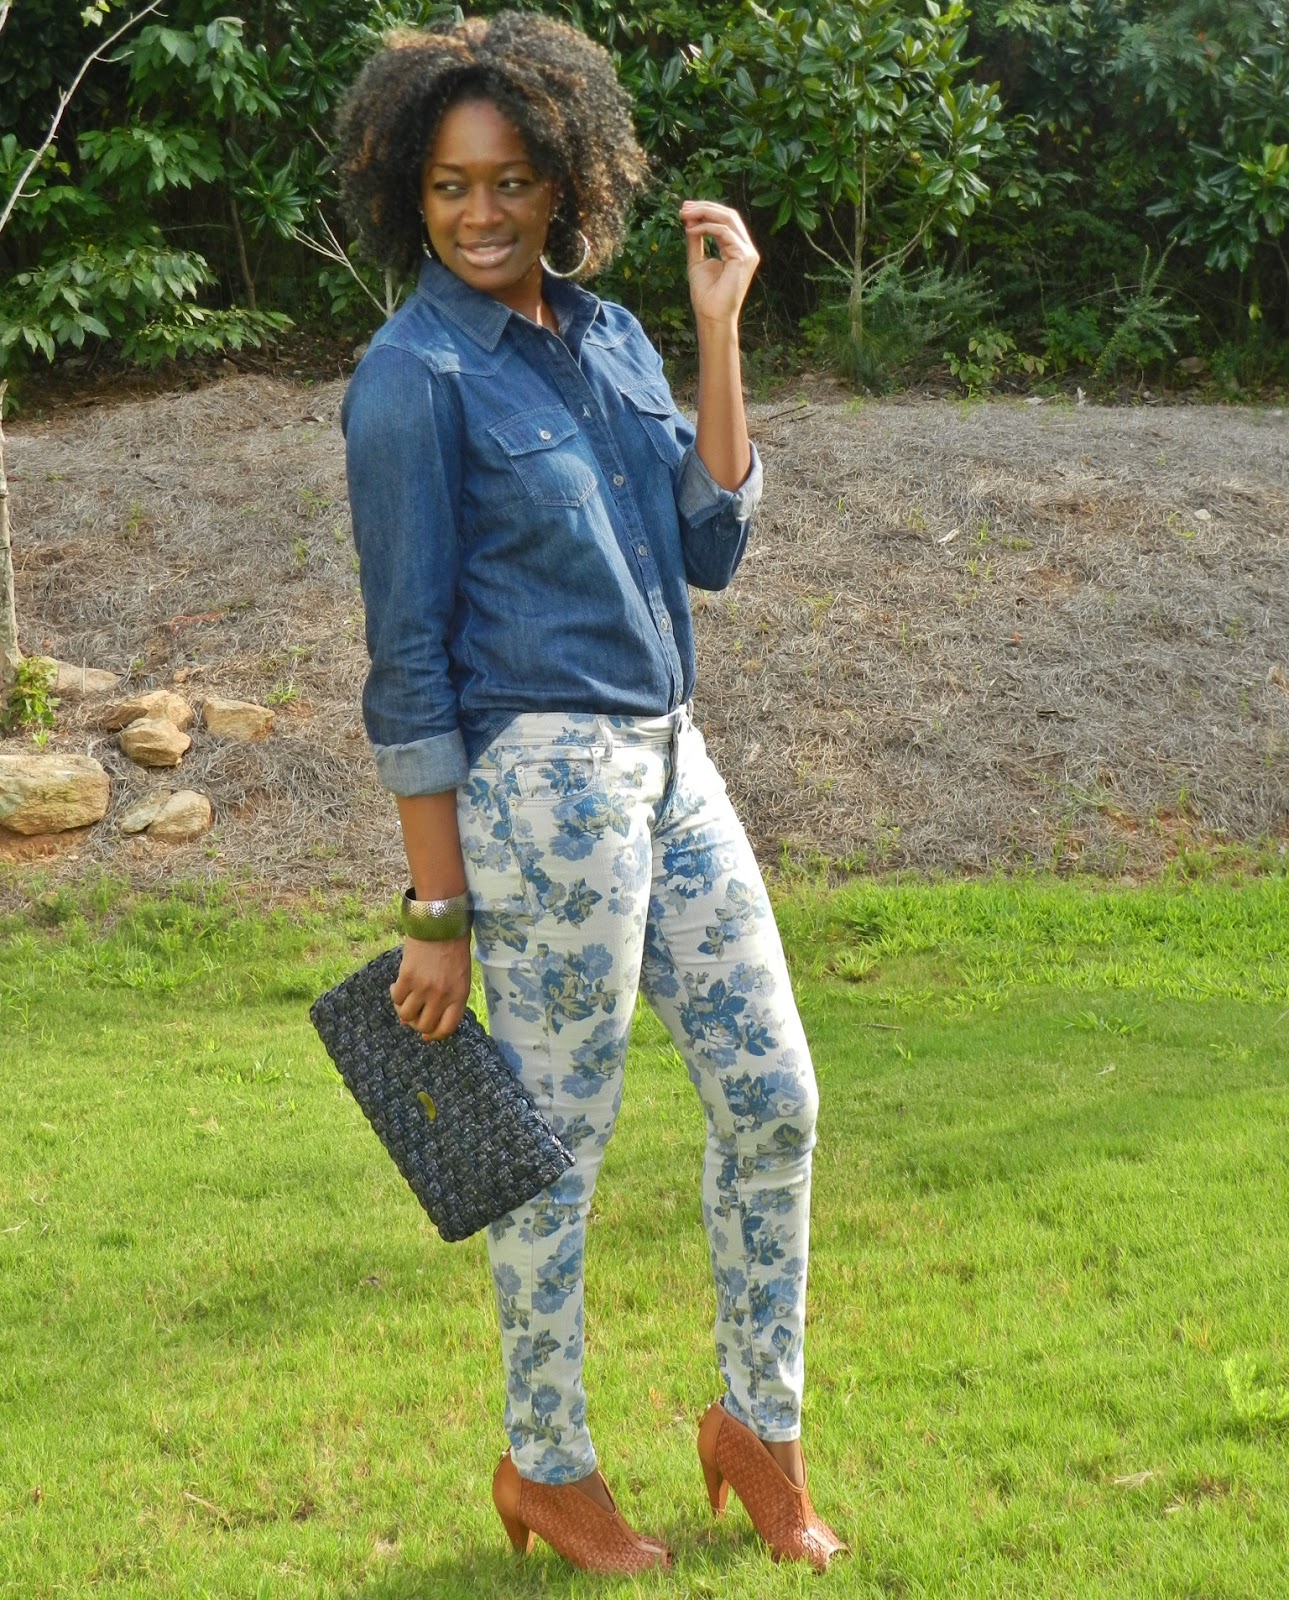 Thrifted Trends: How to Wear Denim on Denim | Two Stylish Kays